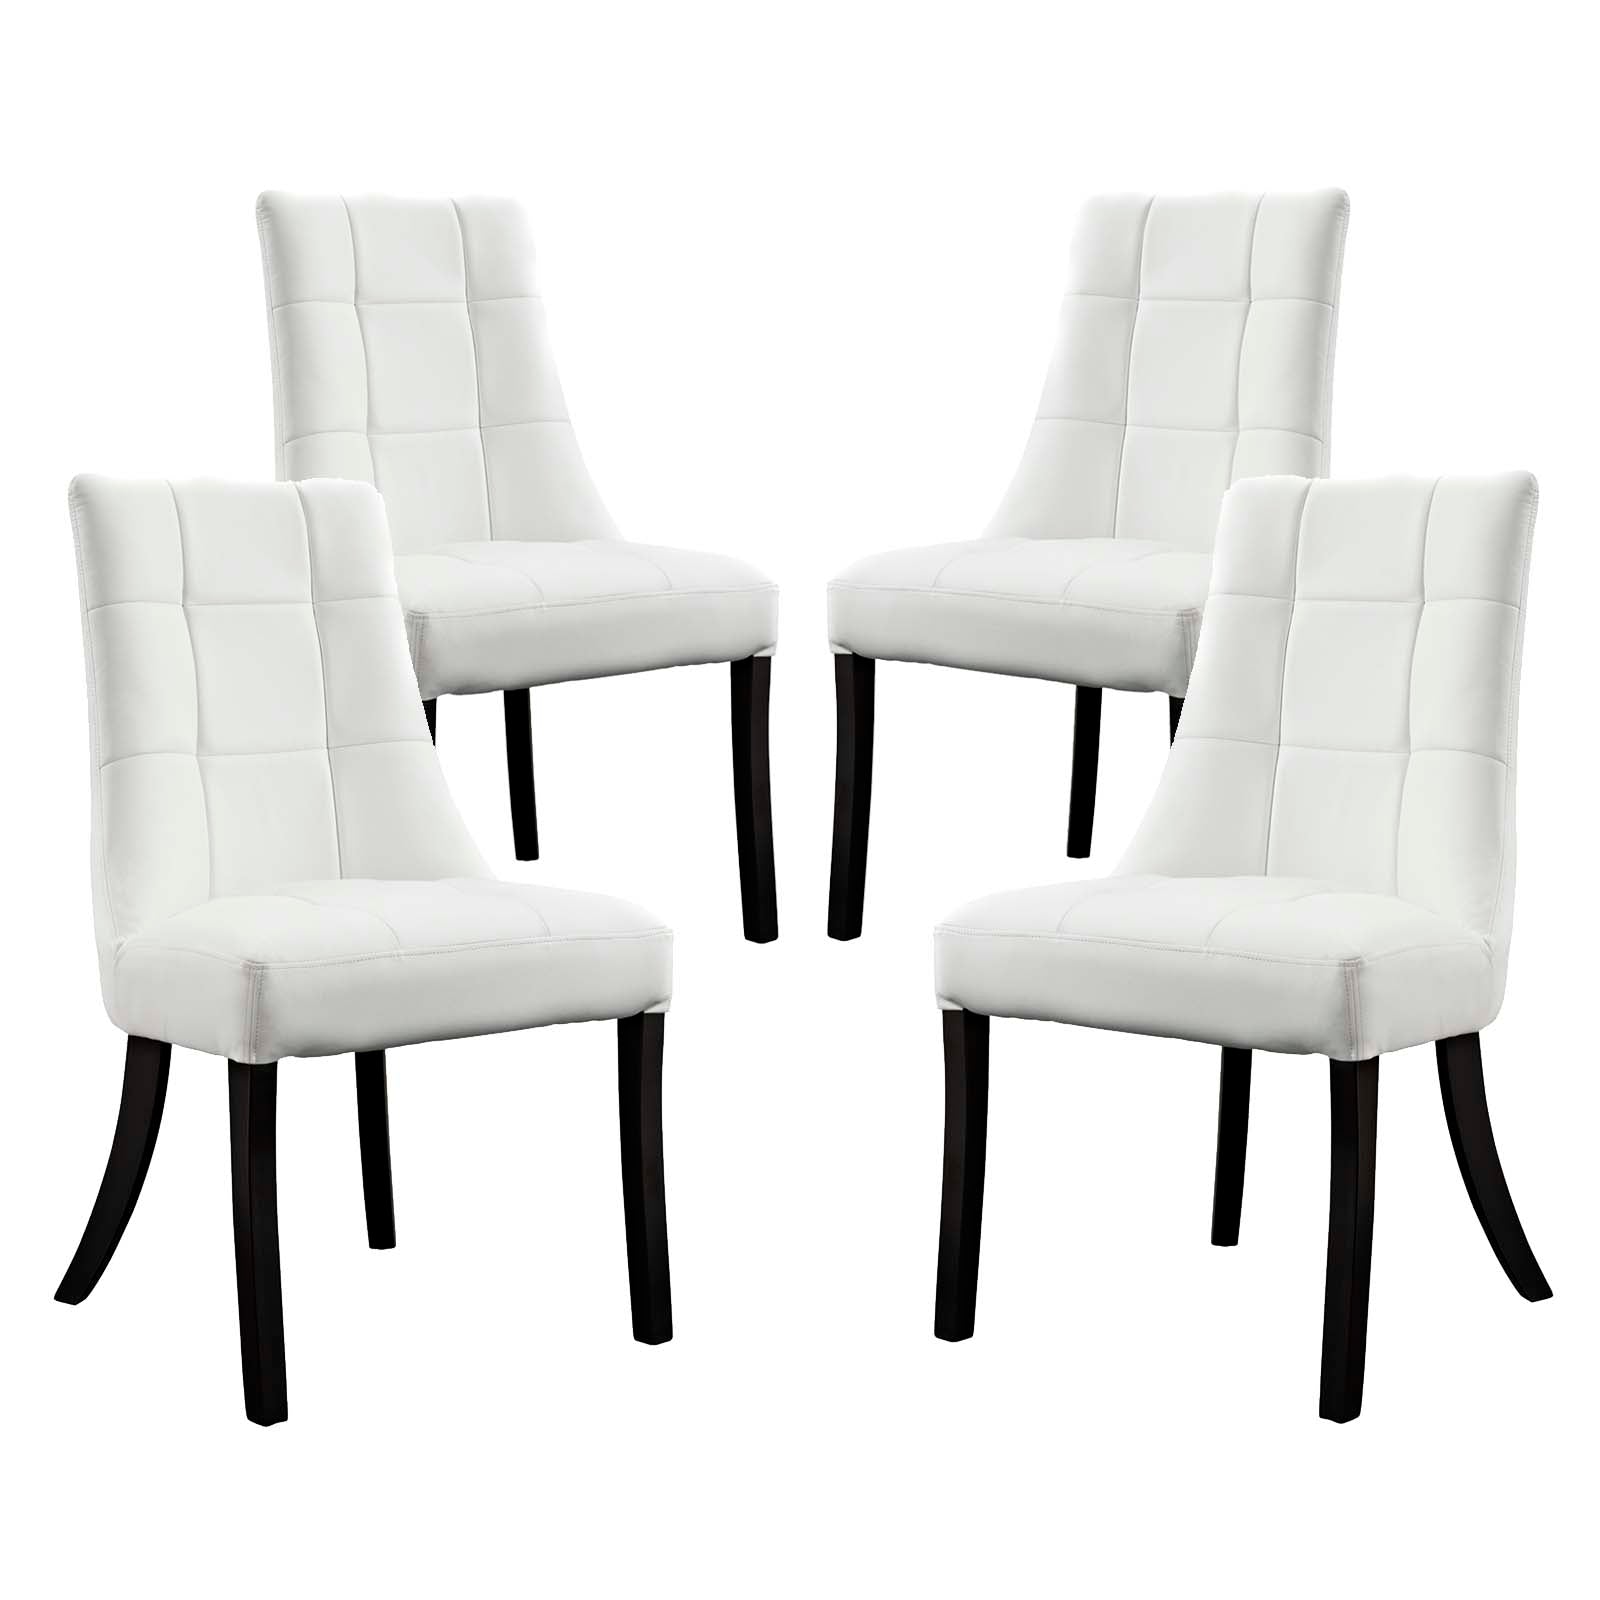 Modway Dining Chairs - Noblesse Dining Chair Vinyl ( Set of 4 ) White